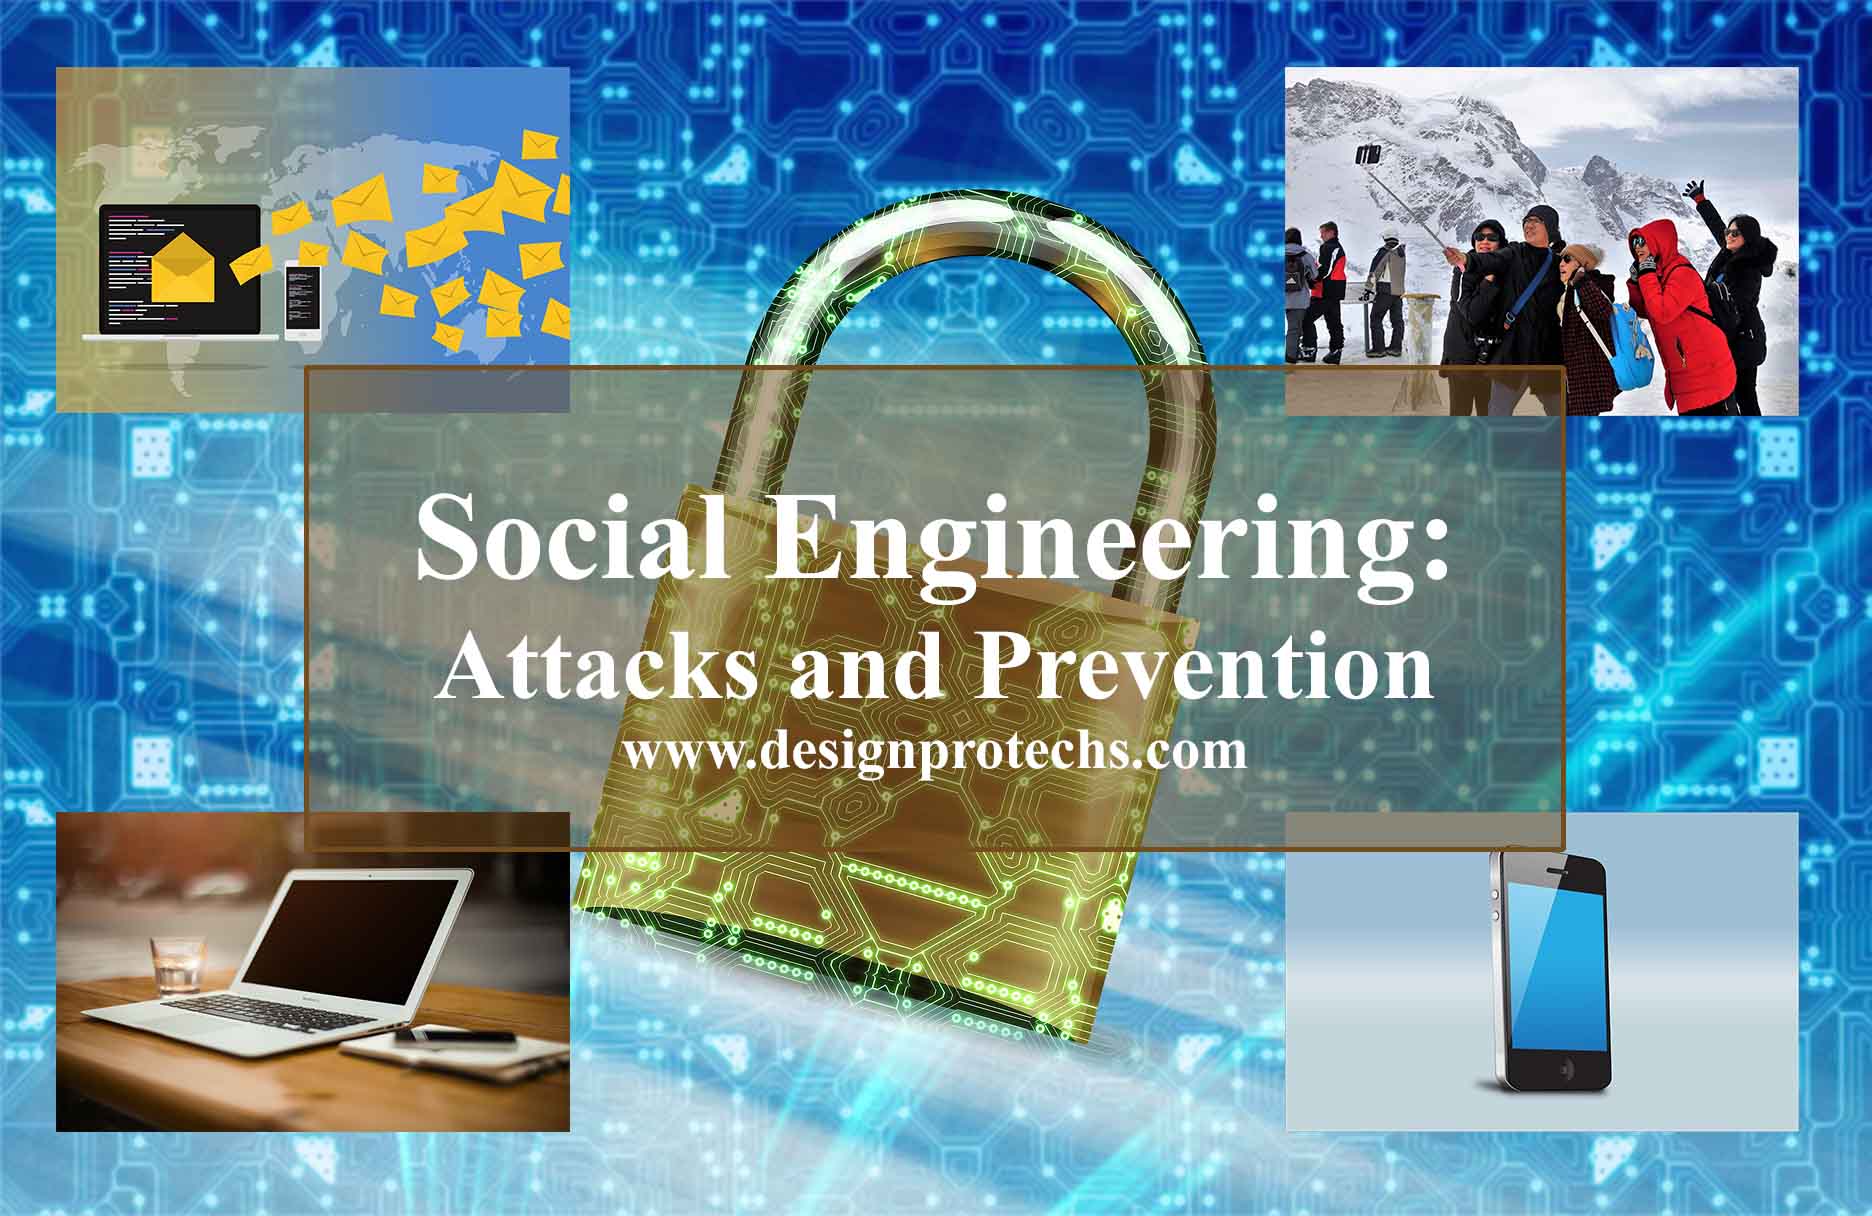 Social Engineering - Attacks and Prevention